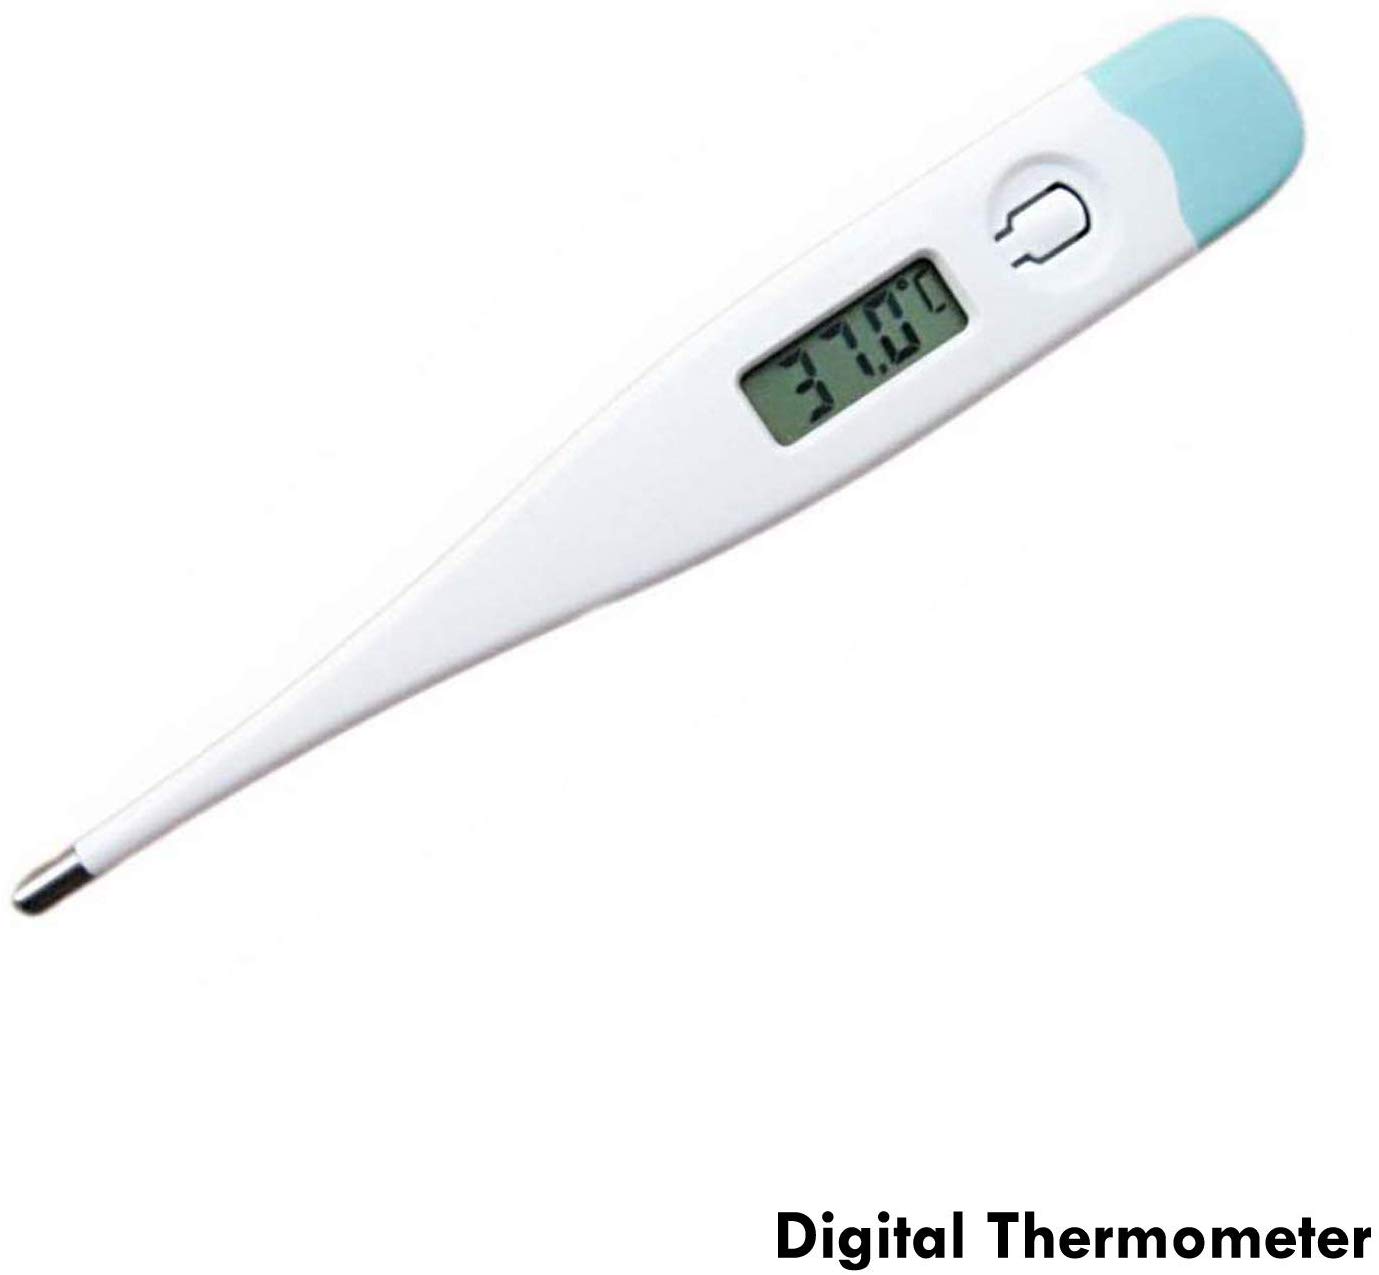 Digital thermometer with best low 